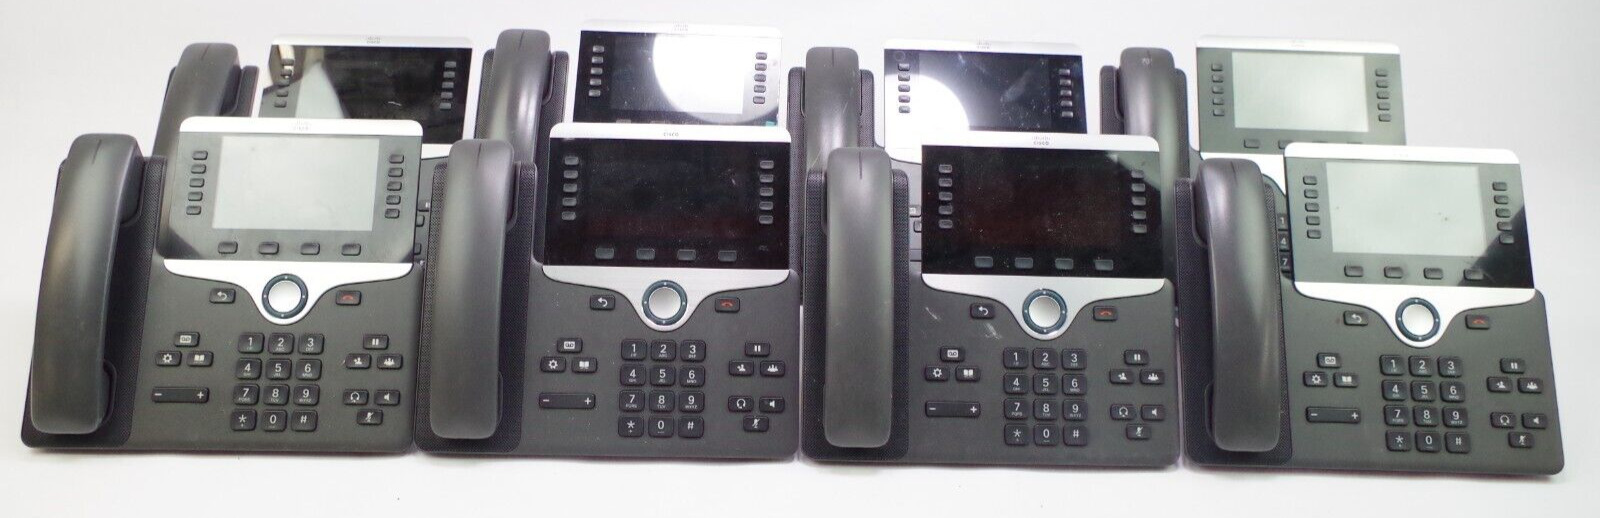 Lot of 8 Cisco CP-8811 IP VoIP PoE Business Phones w/ Stands & Handsets